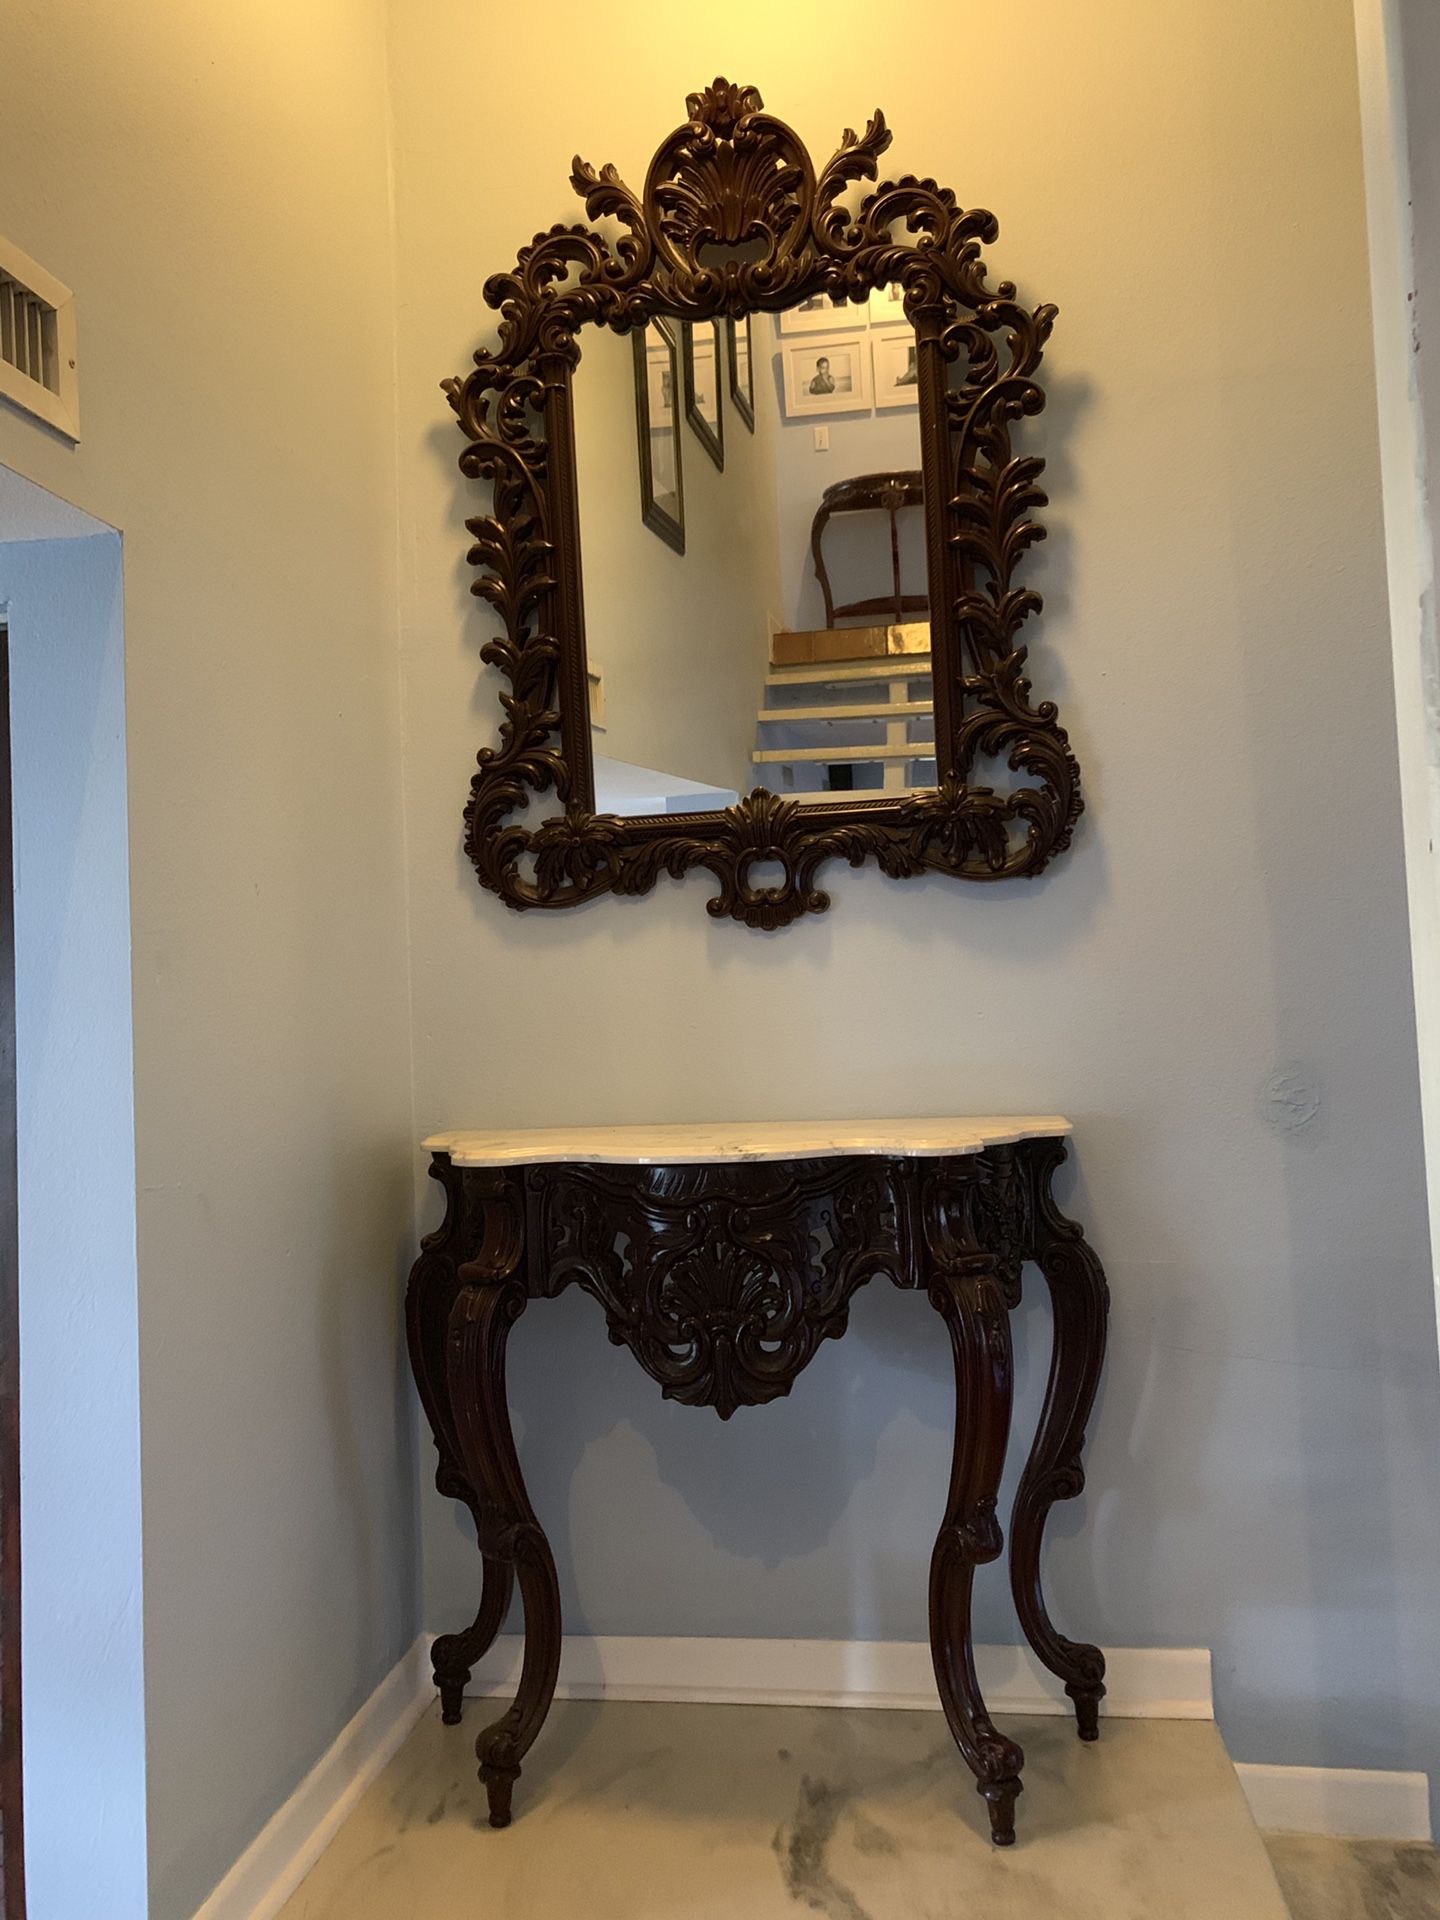 Large Hanging Mirror & Console Tables (3 TOTAL)